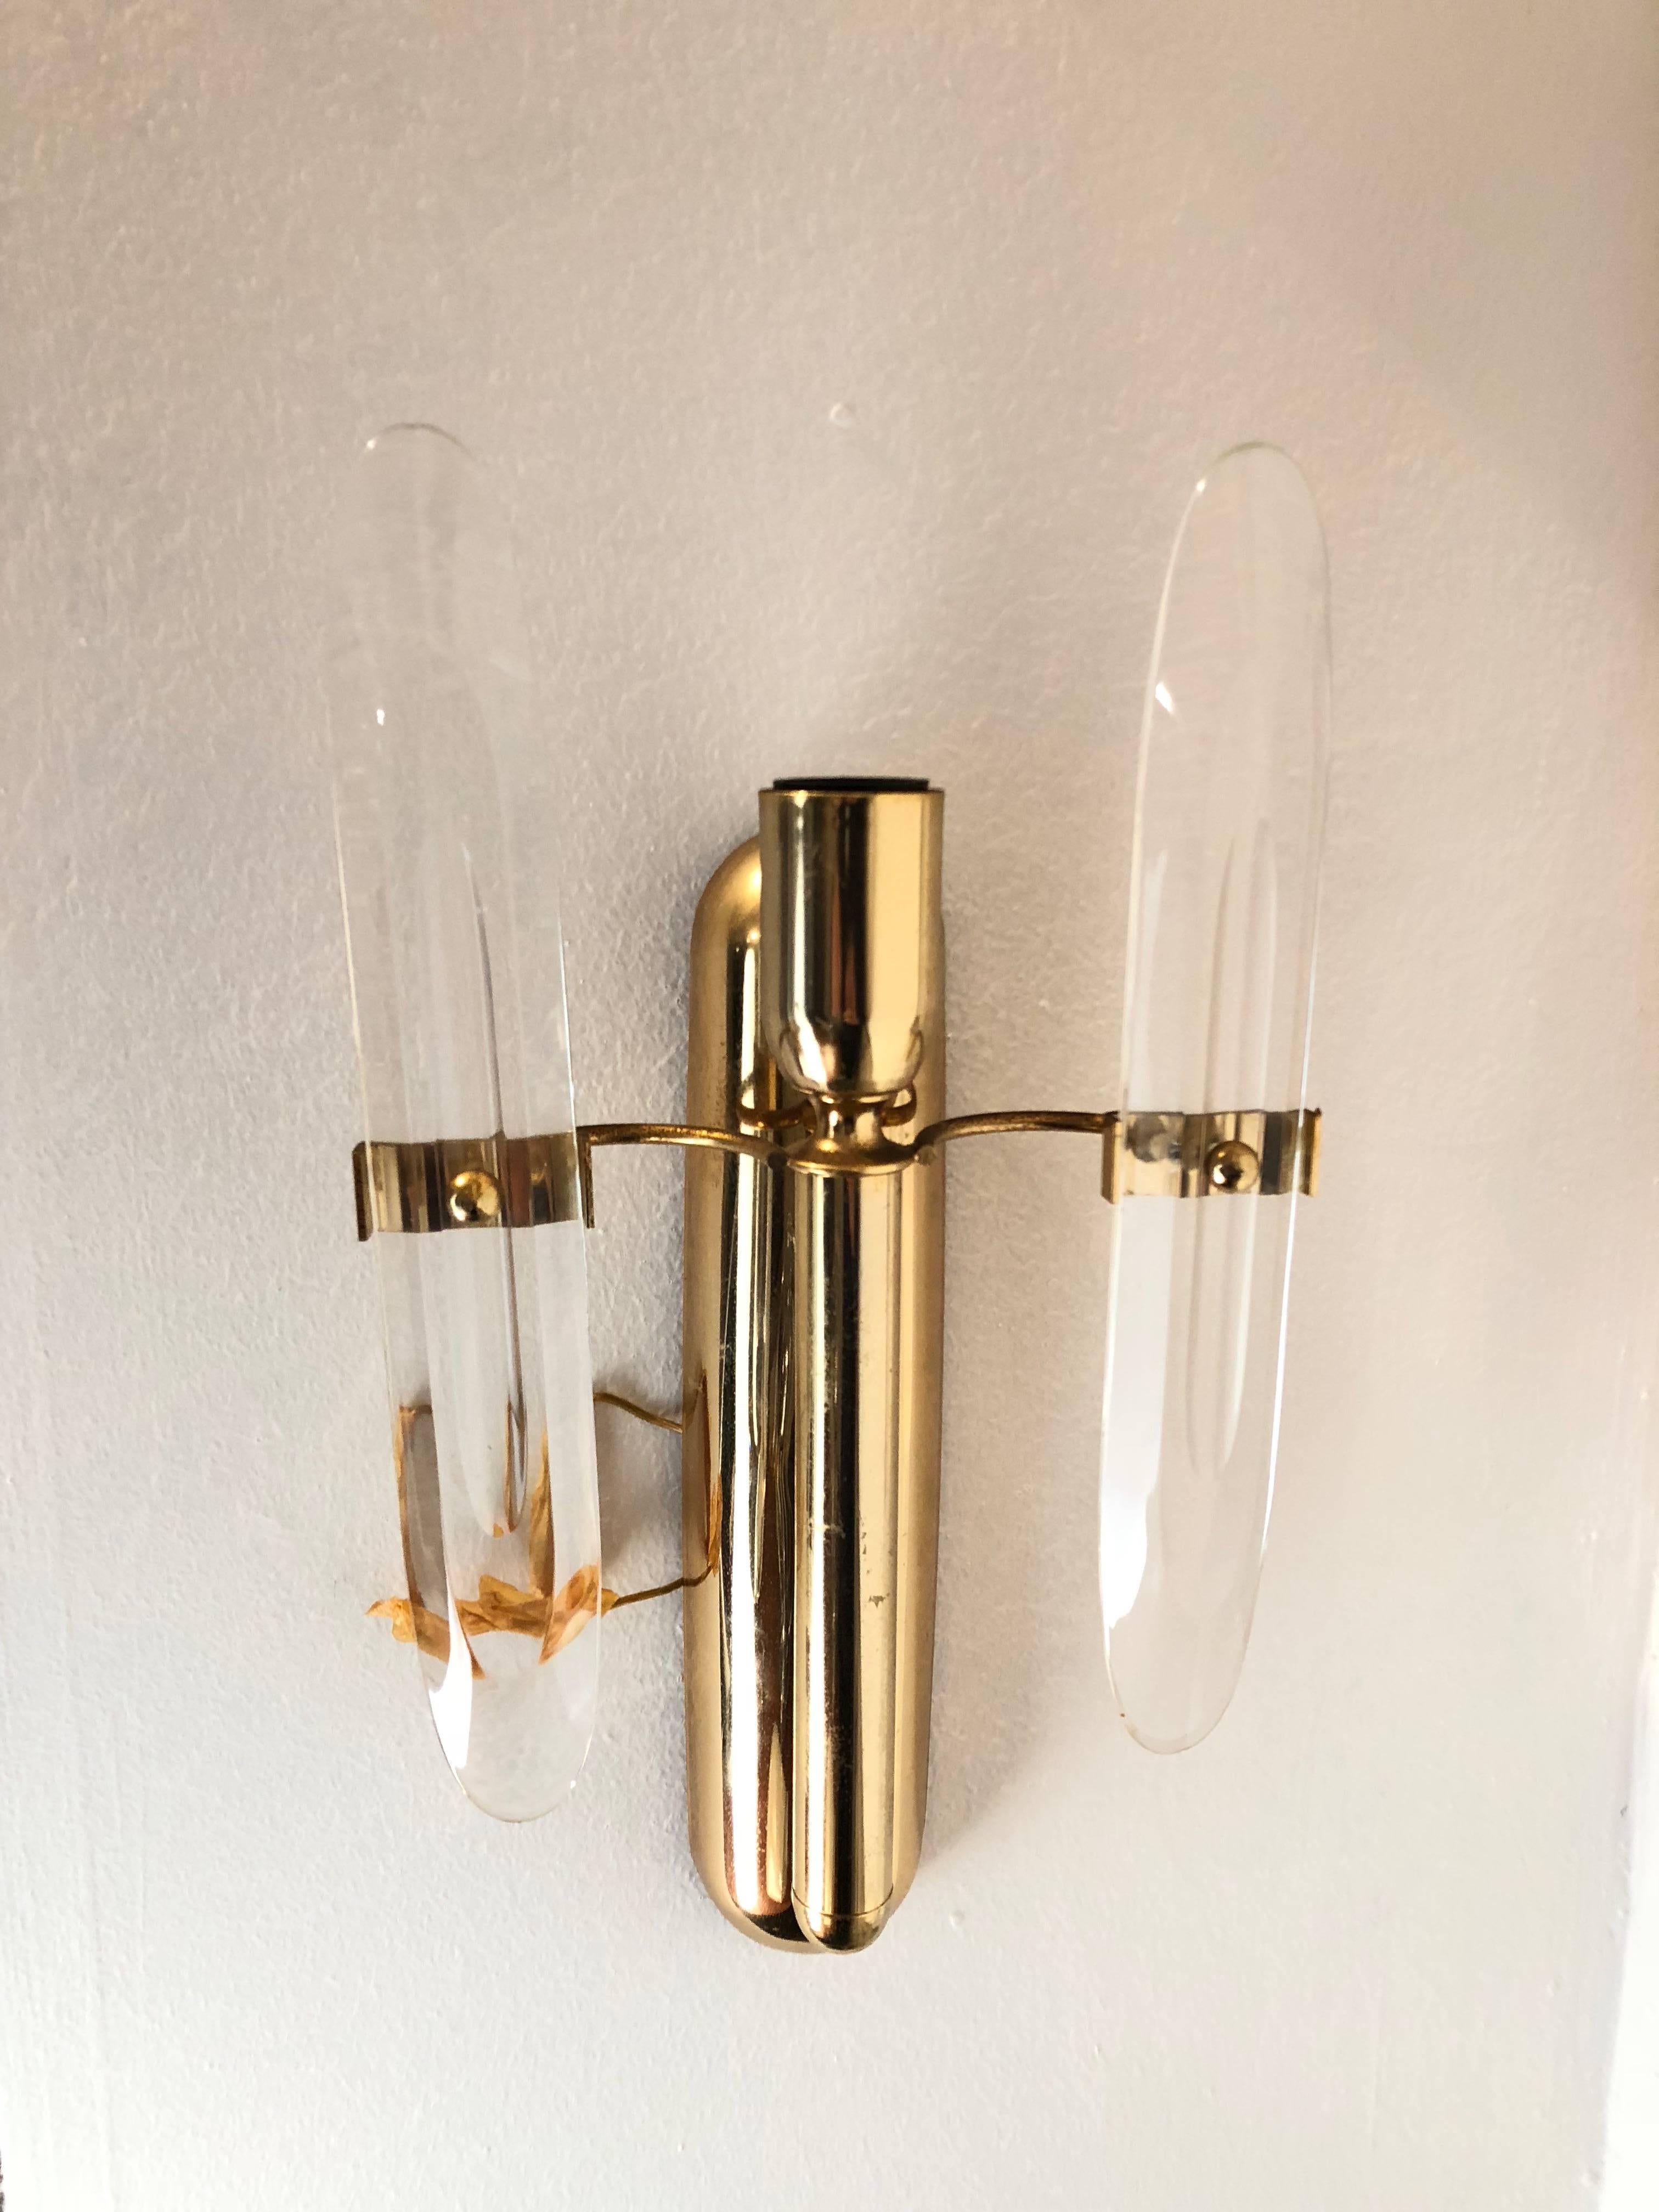 Set of two Gaetano Sciolari brass and glass wall sconces, the two sconces are equals, made in Italy by Stilkronen in 1960. They work with both 110 and 220 Volt.